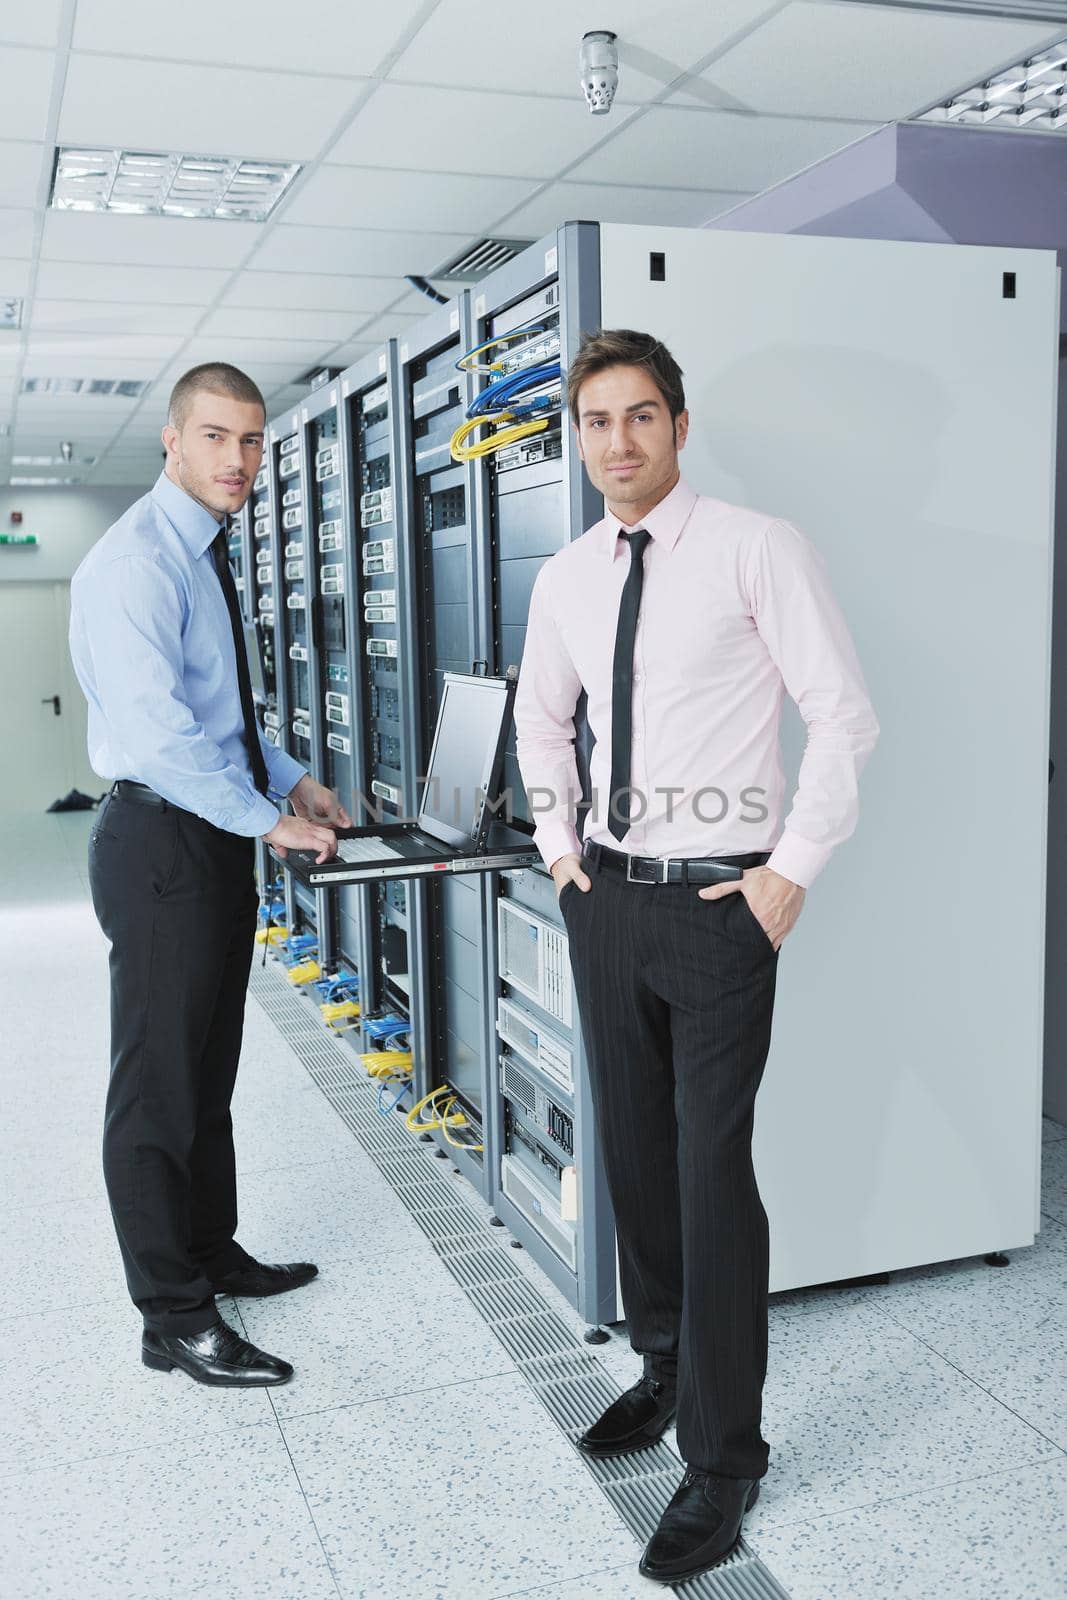 group of young business people it engineer in network server room solving problems and give help and support